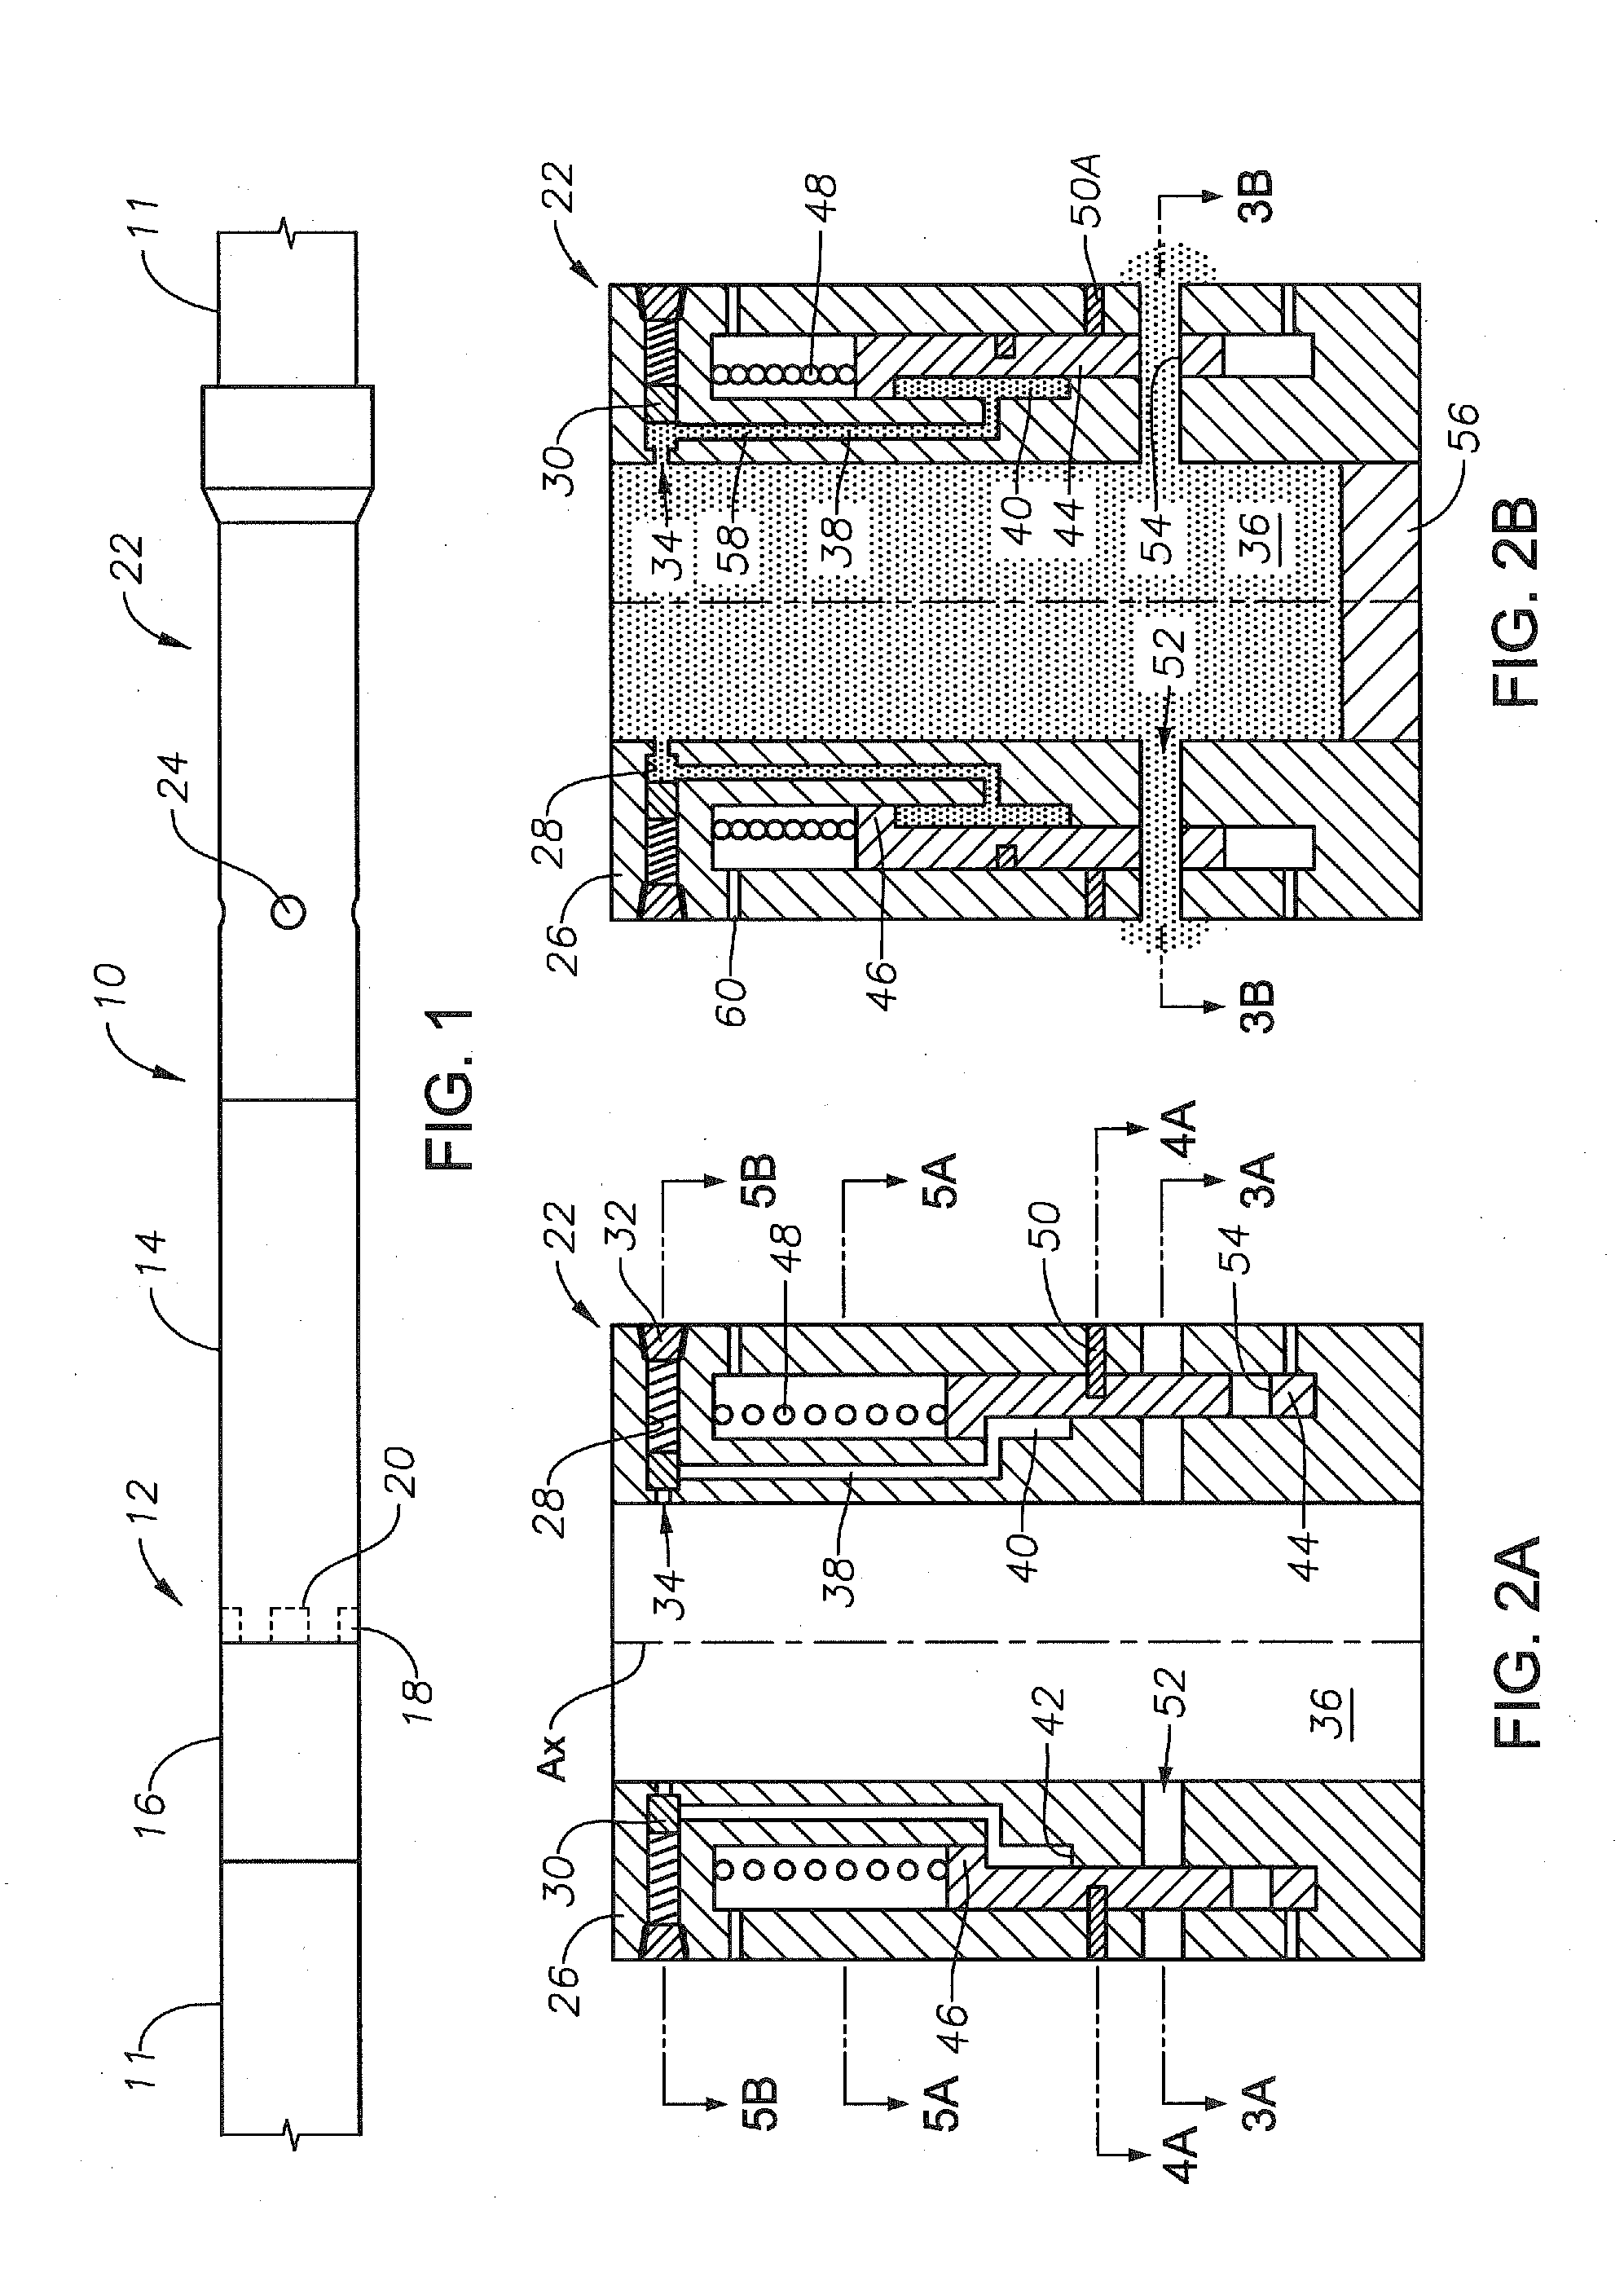 Downhole tool for use in a drill string